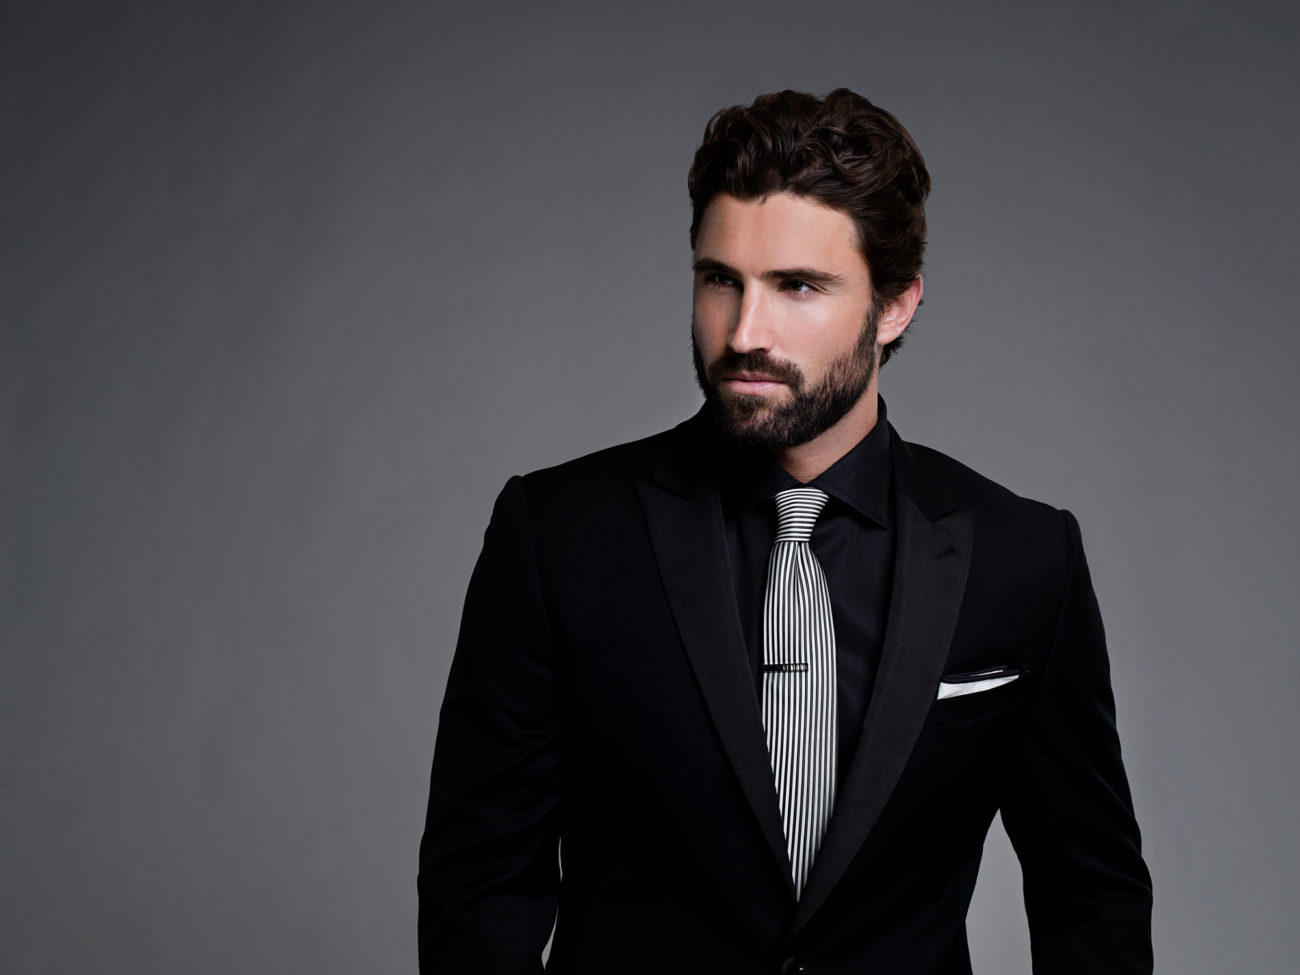 Brody Jenner Comes to Ottawa - FACES Magazine1300 x 975